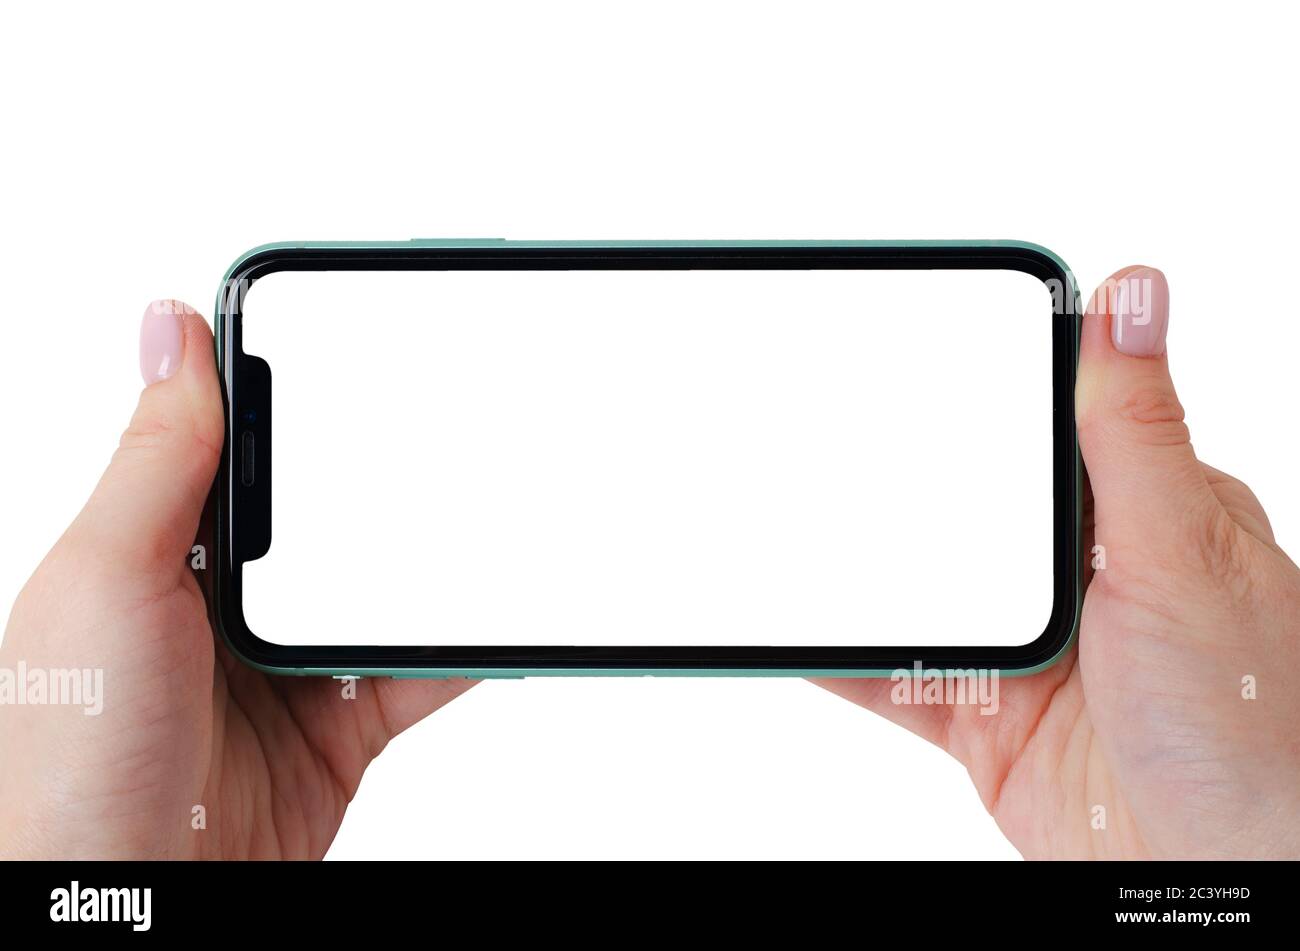 Moscow, Russia - January 18, 2020: Green Apple iPhone 11 mock up horizontal in a female hands isolated on a white background. Close-up of a new smartp Stock Photo